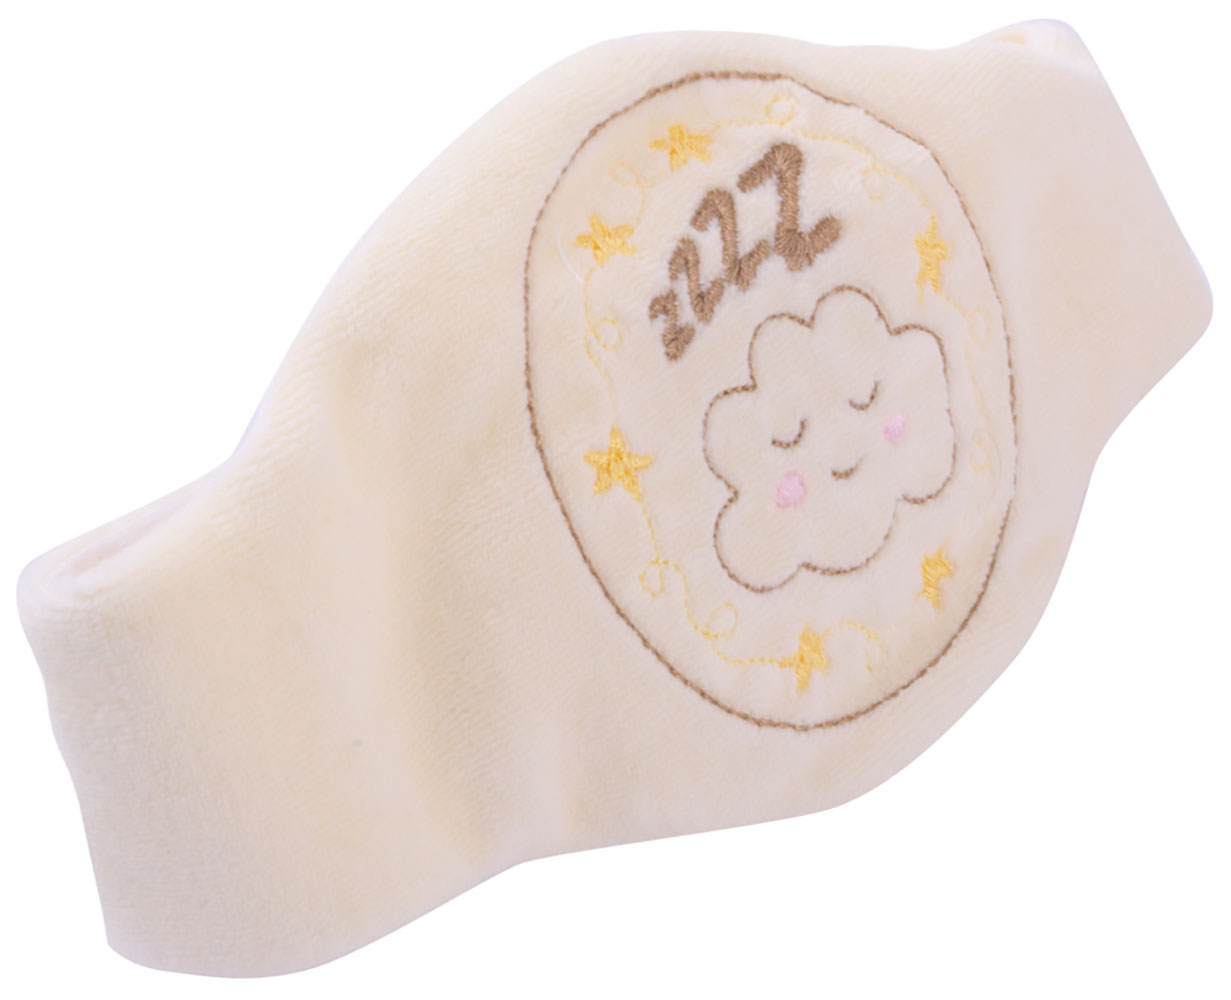 Babyjem Baby Pillow For Kids/Childrens, Heat And Cold Therap,Baby Comfortable Pillow/Cushion, White Color